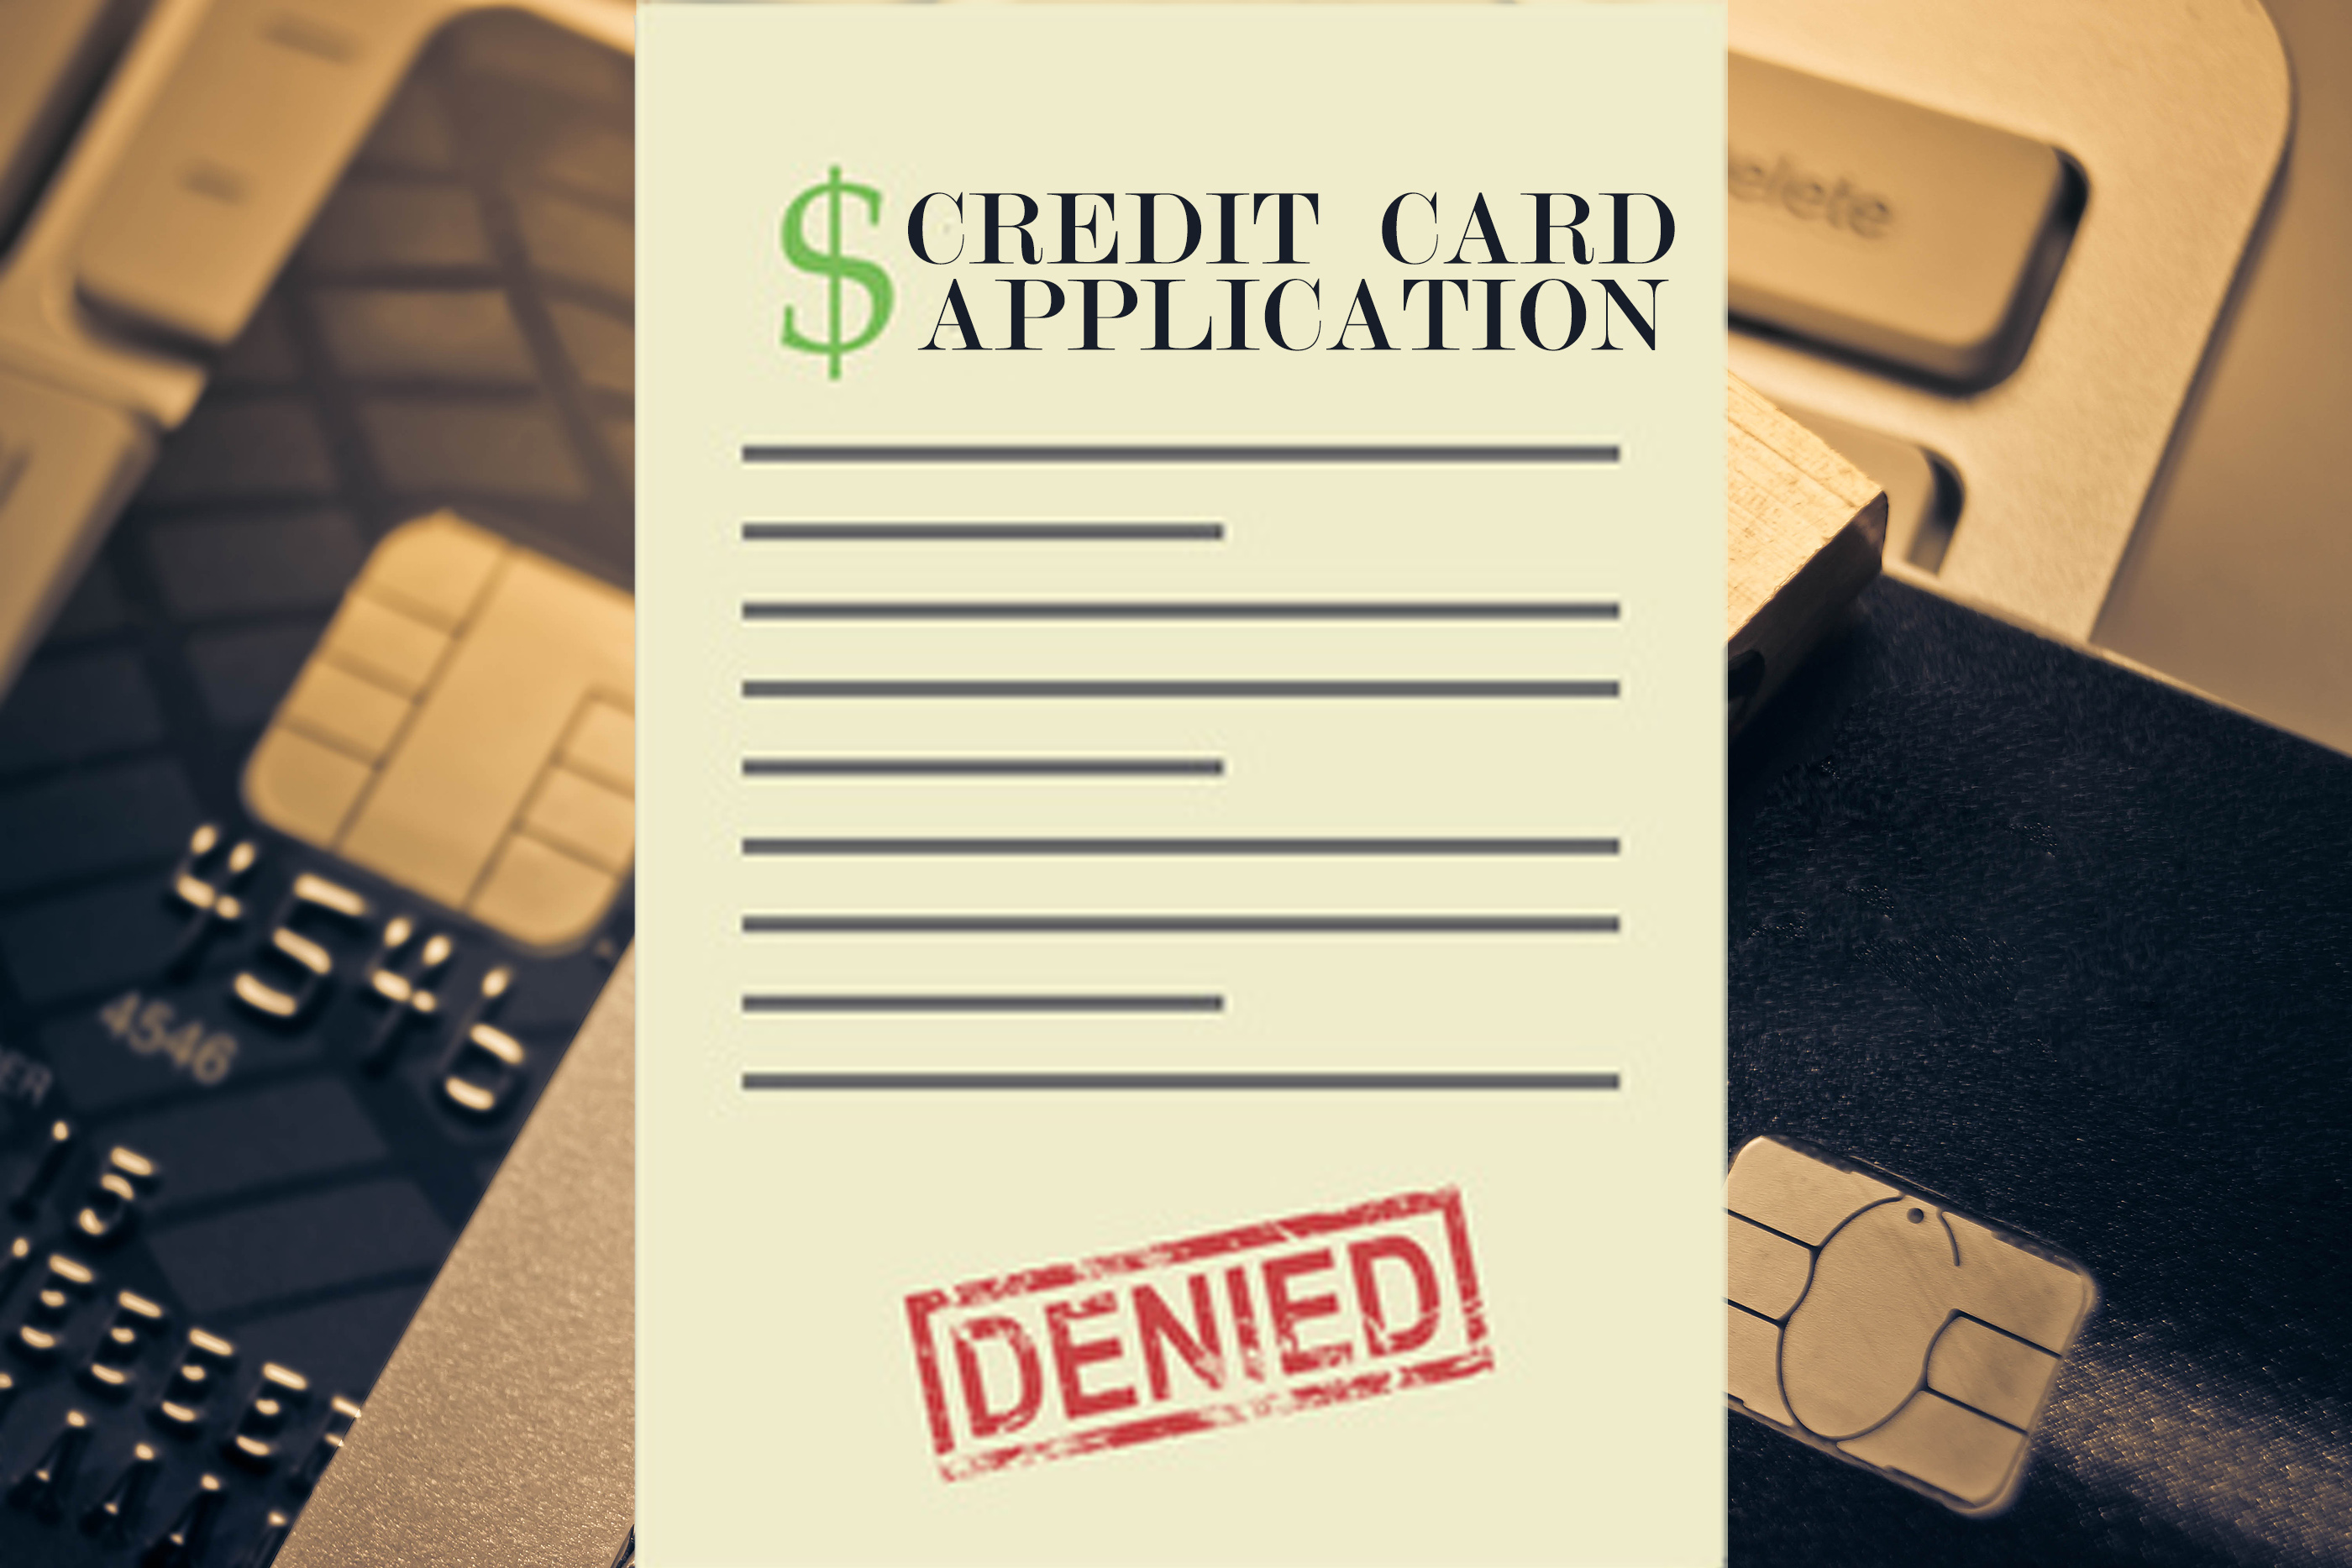 Your Credit Card Application May Be Rejected Despite an Excellent Credit Score